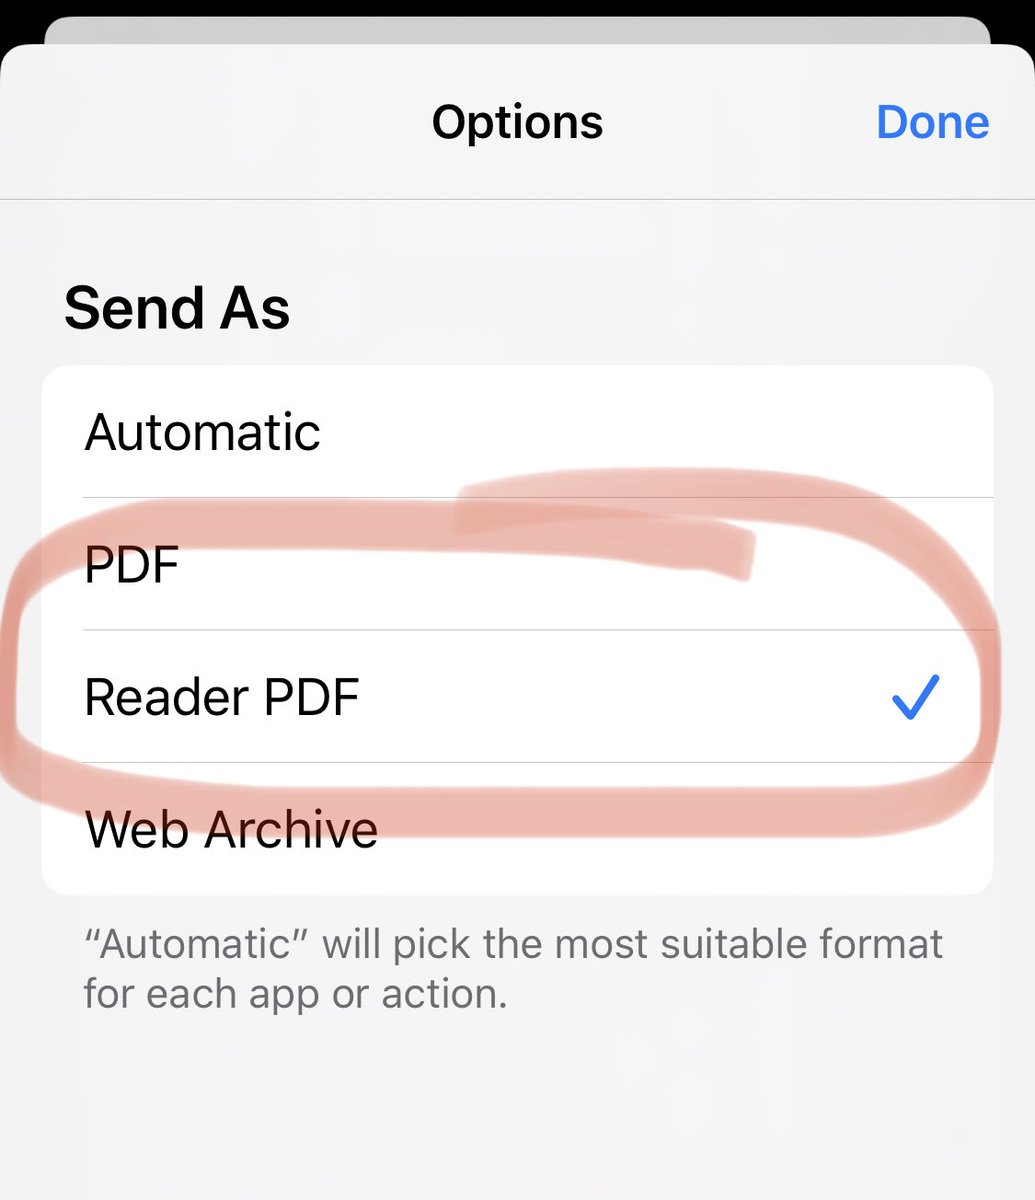 Tip of the Summer: you can email web articles & PDFs to your kindle by using the word “convert” in the subject line. (Bonus: refurb waterproof Kindles are $100 on Amazon) https://www.amazon.com/gp/sendtokindle/email